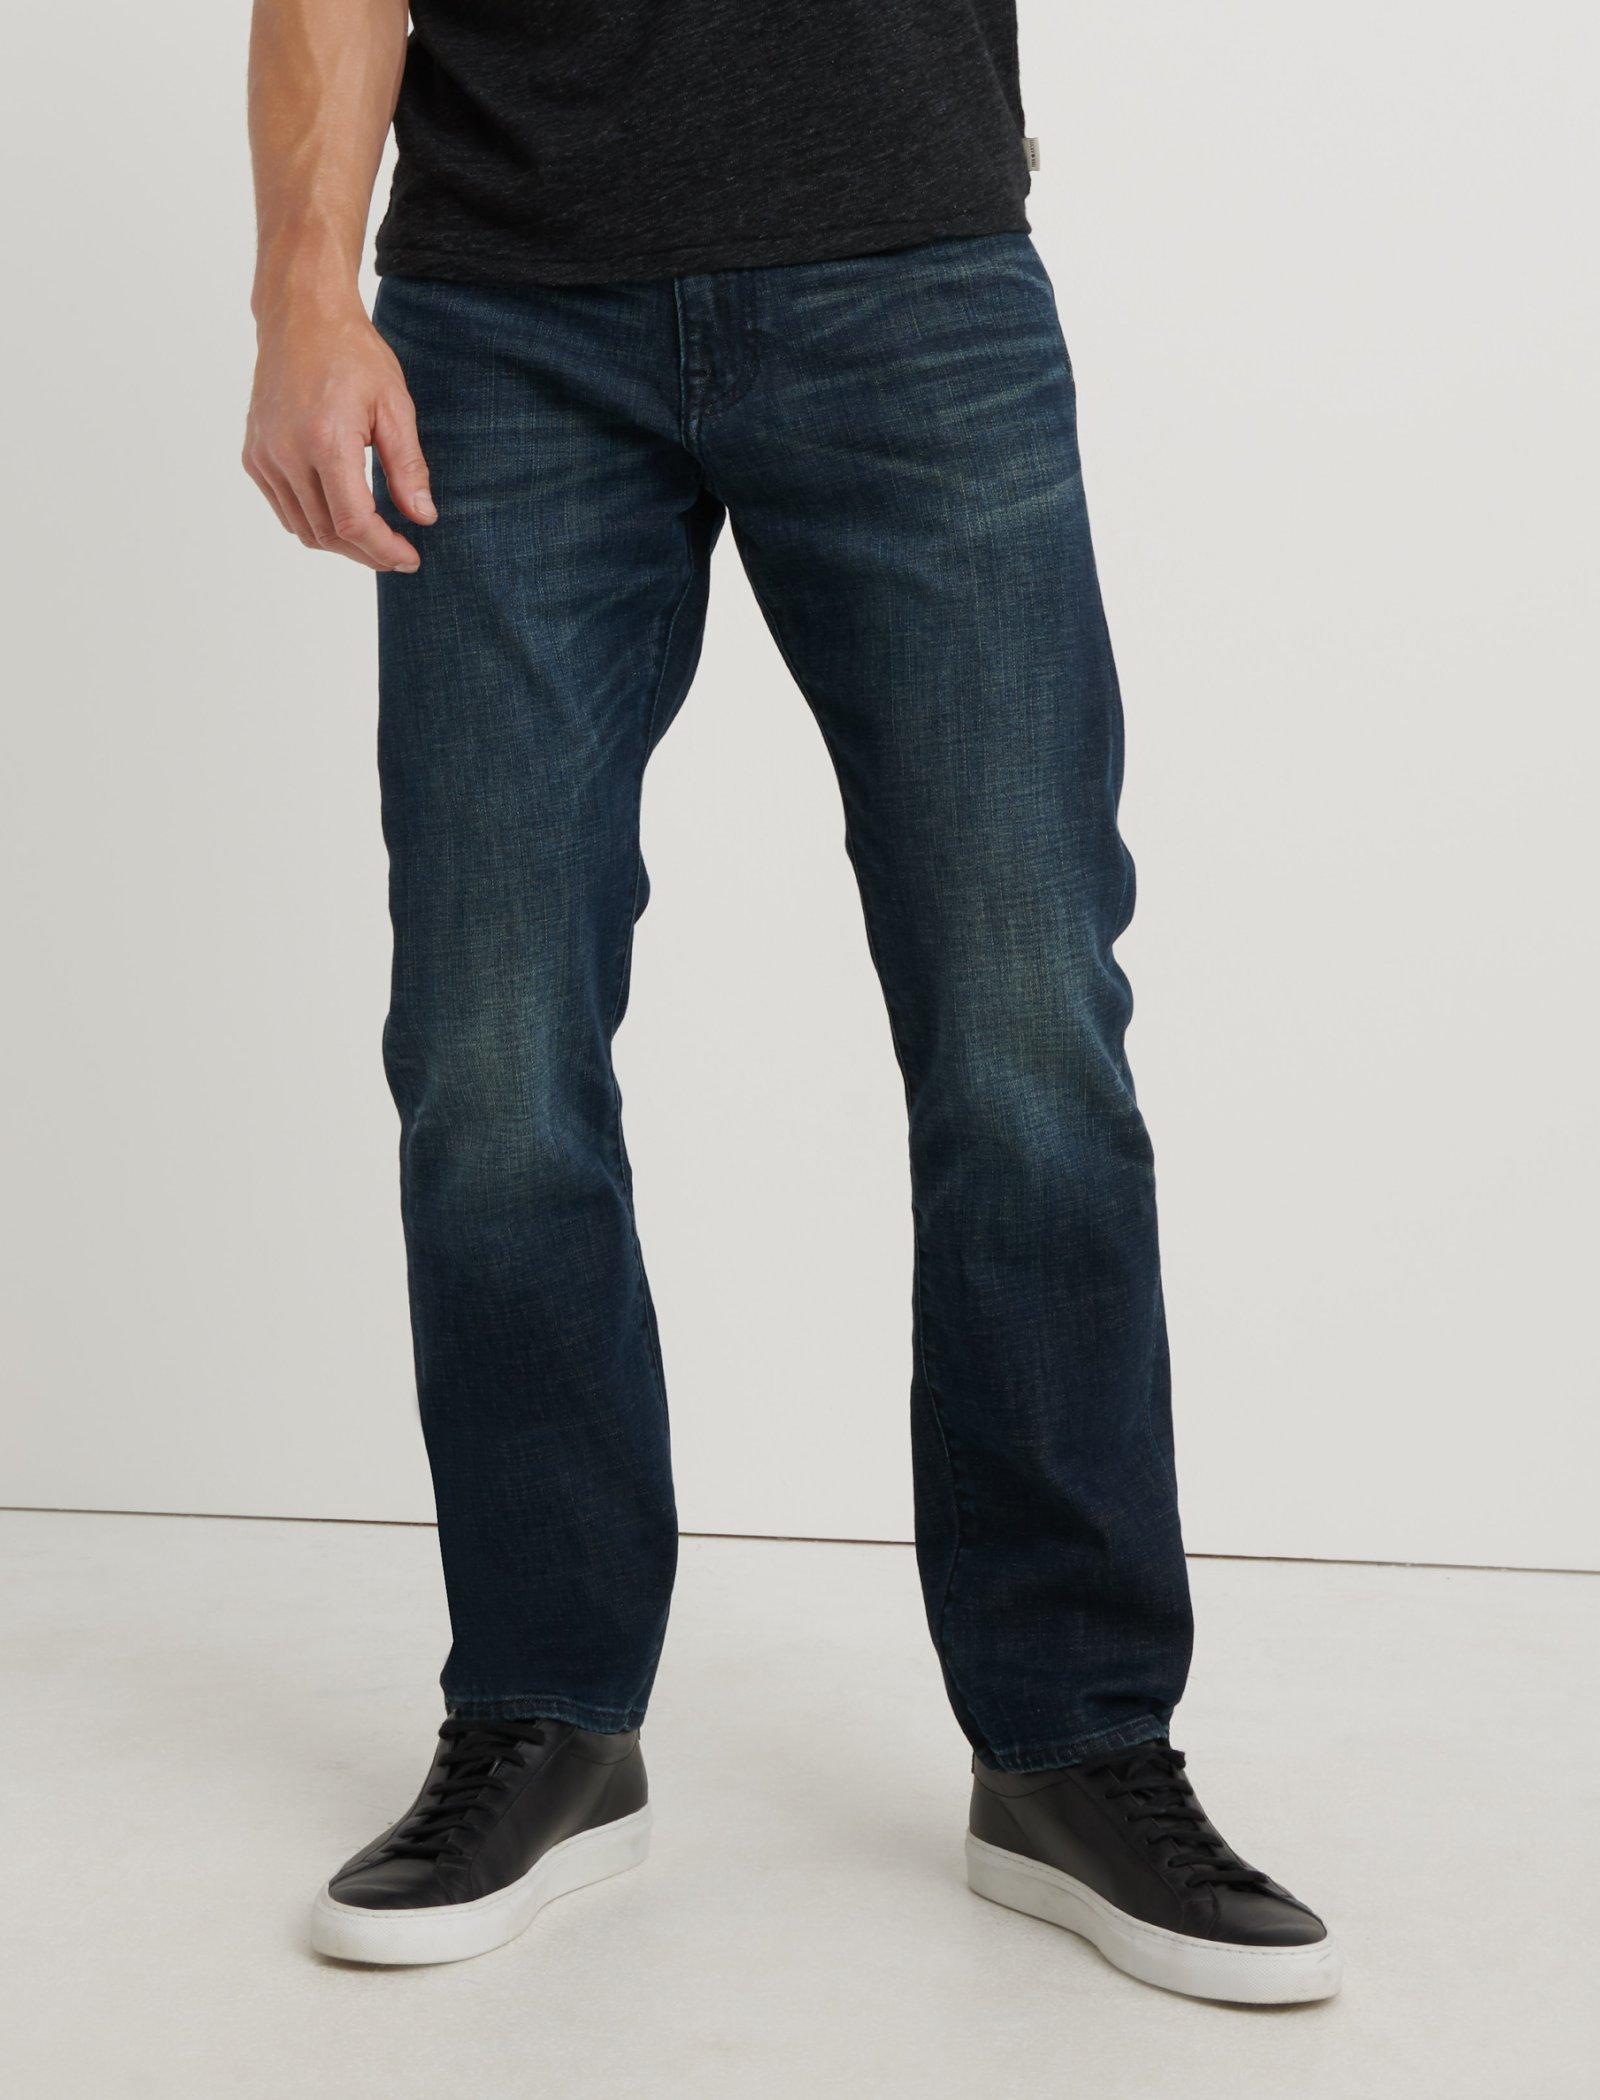 410 lucky brand jeans